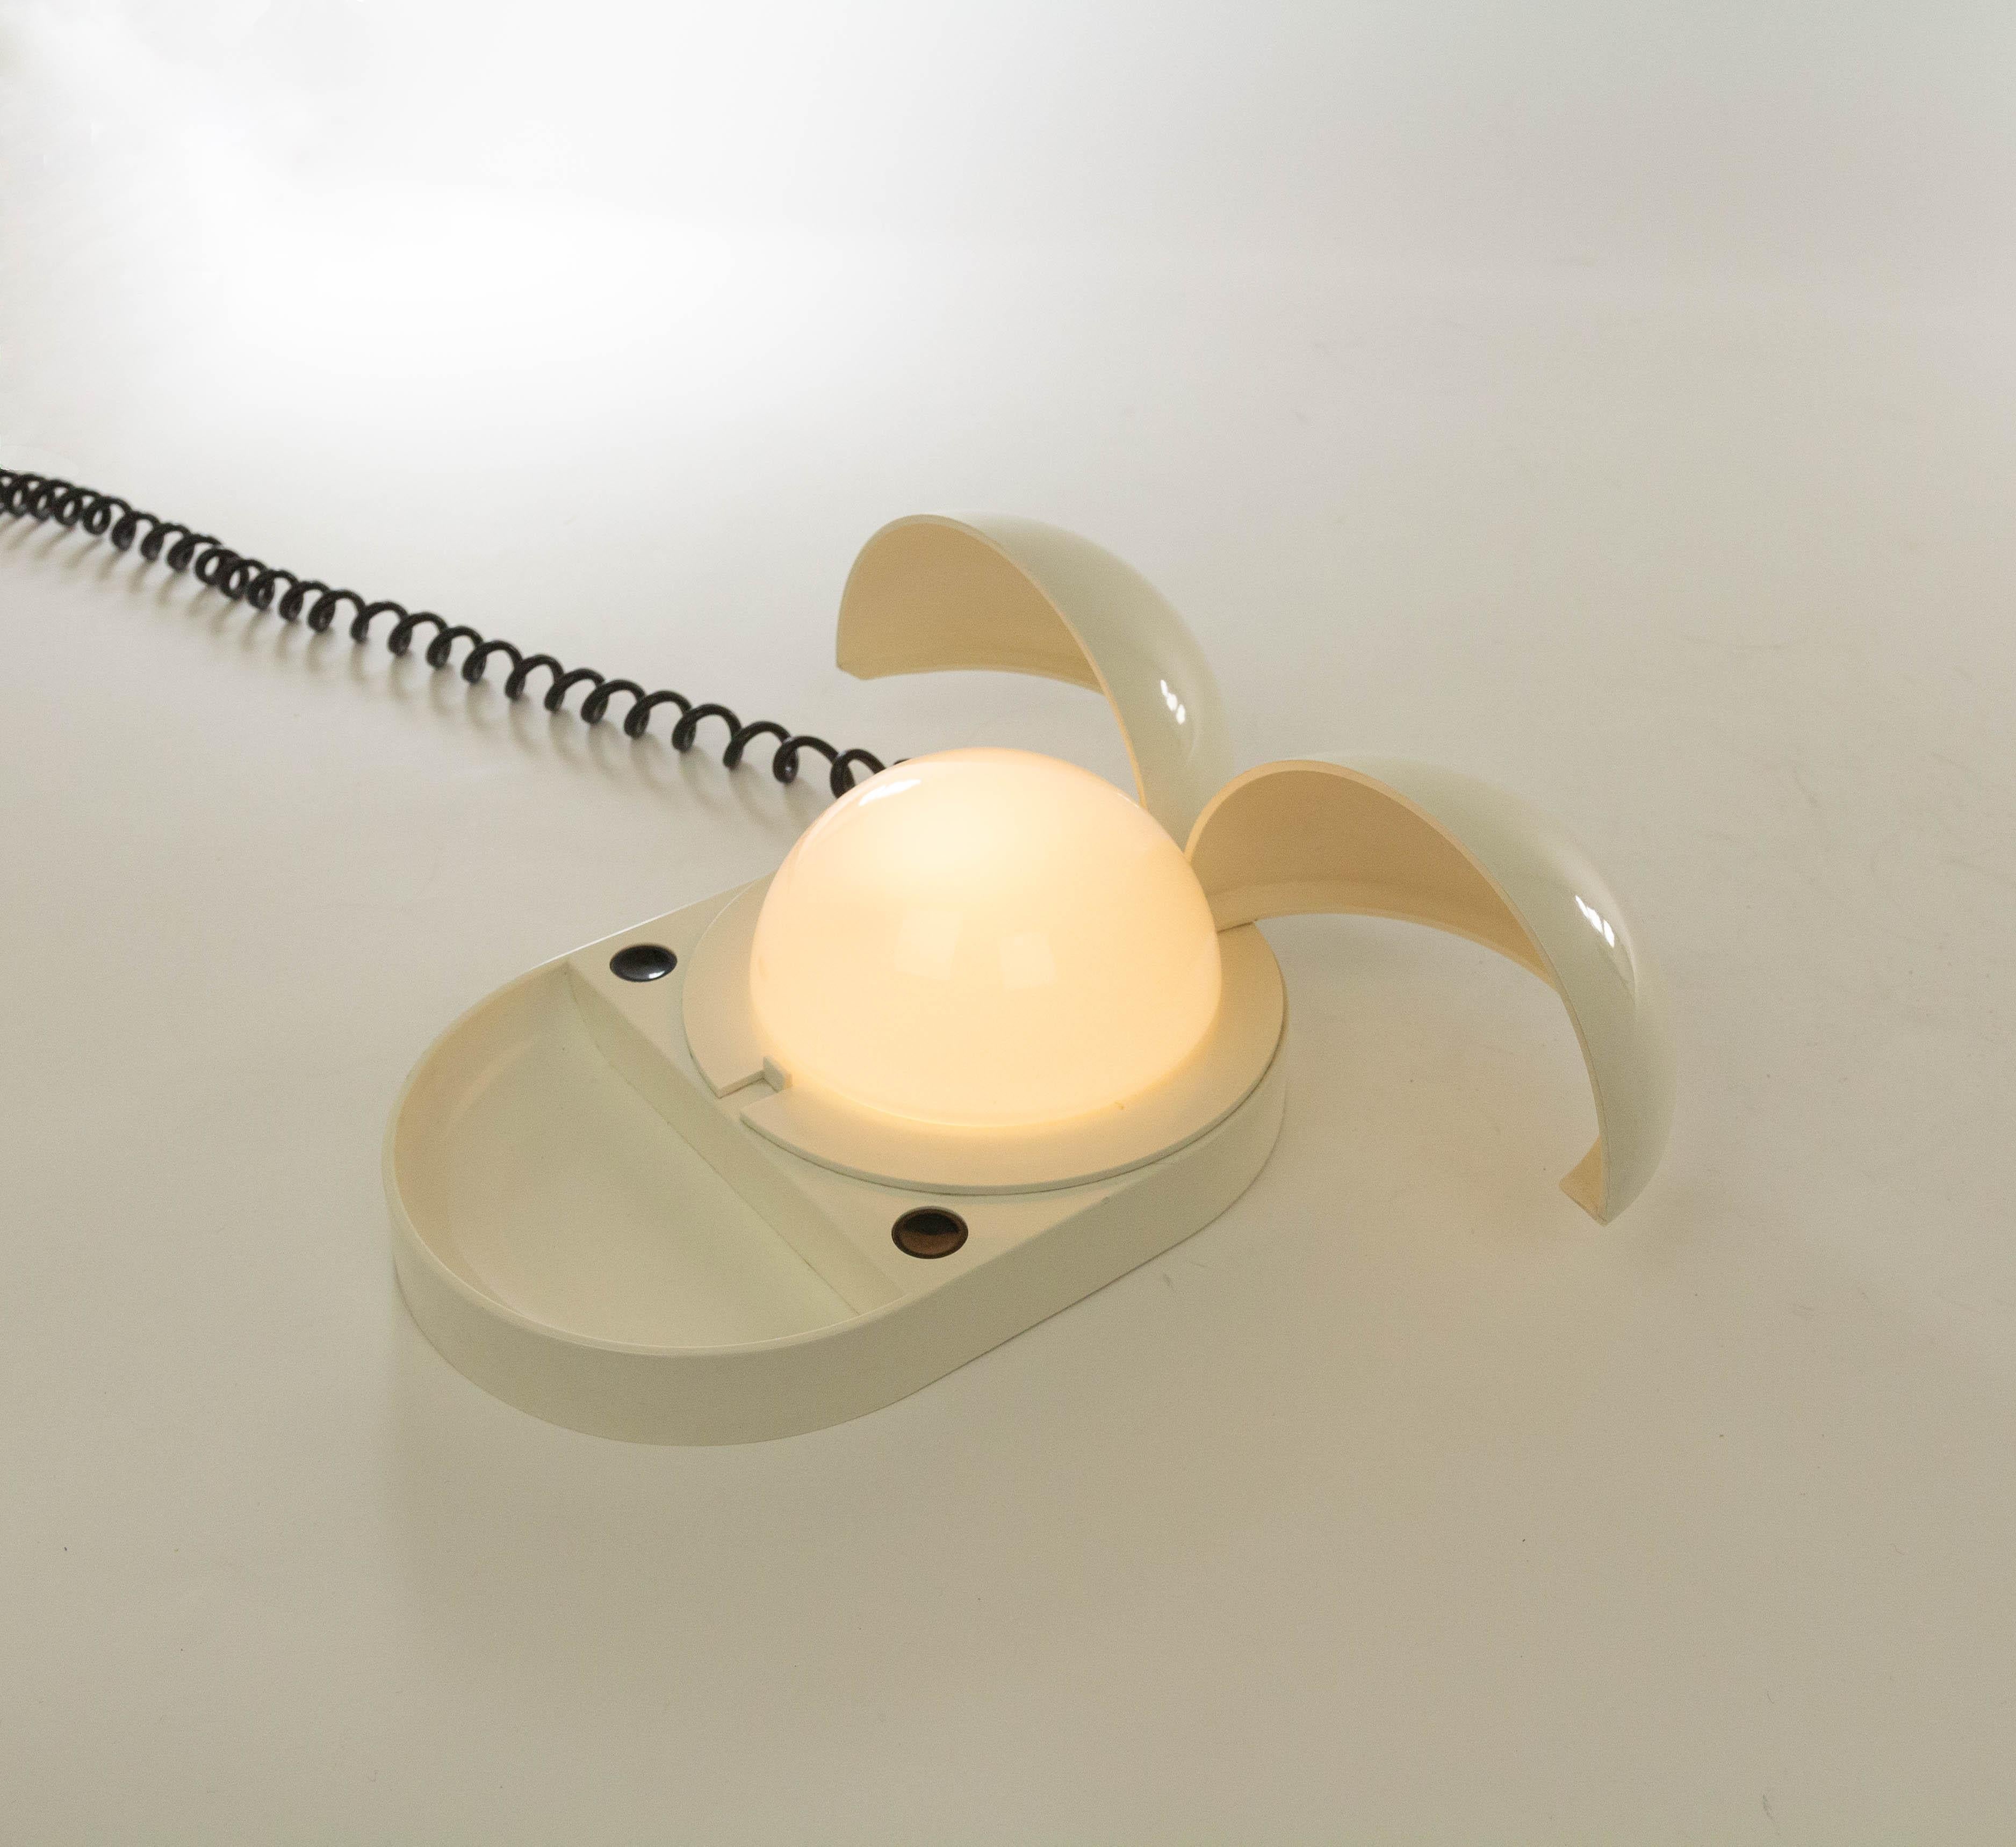 Tapira desk lamp designed by Gianemilio, Piero and Anna Monti (G.P.A. Monti) and produced by Fontana Arte, during the 1970s.

The lamp is made of plastic and contains an opaline glass hemisphere. Above this glass hemisphere are two wings that can